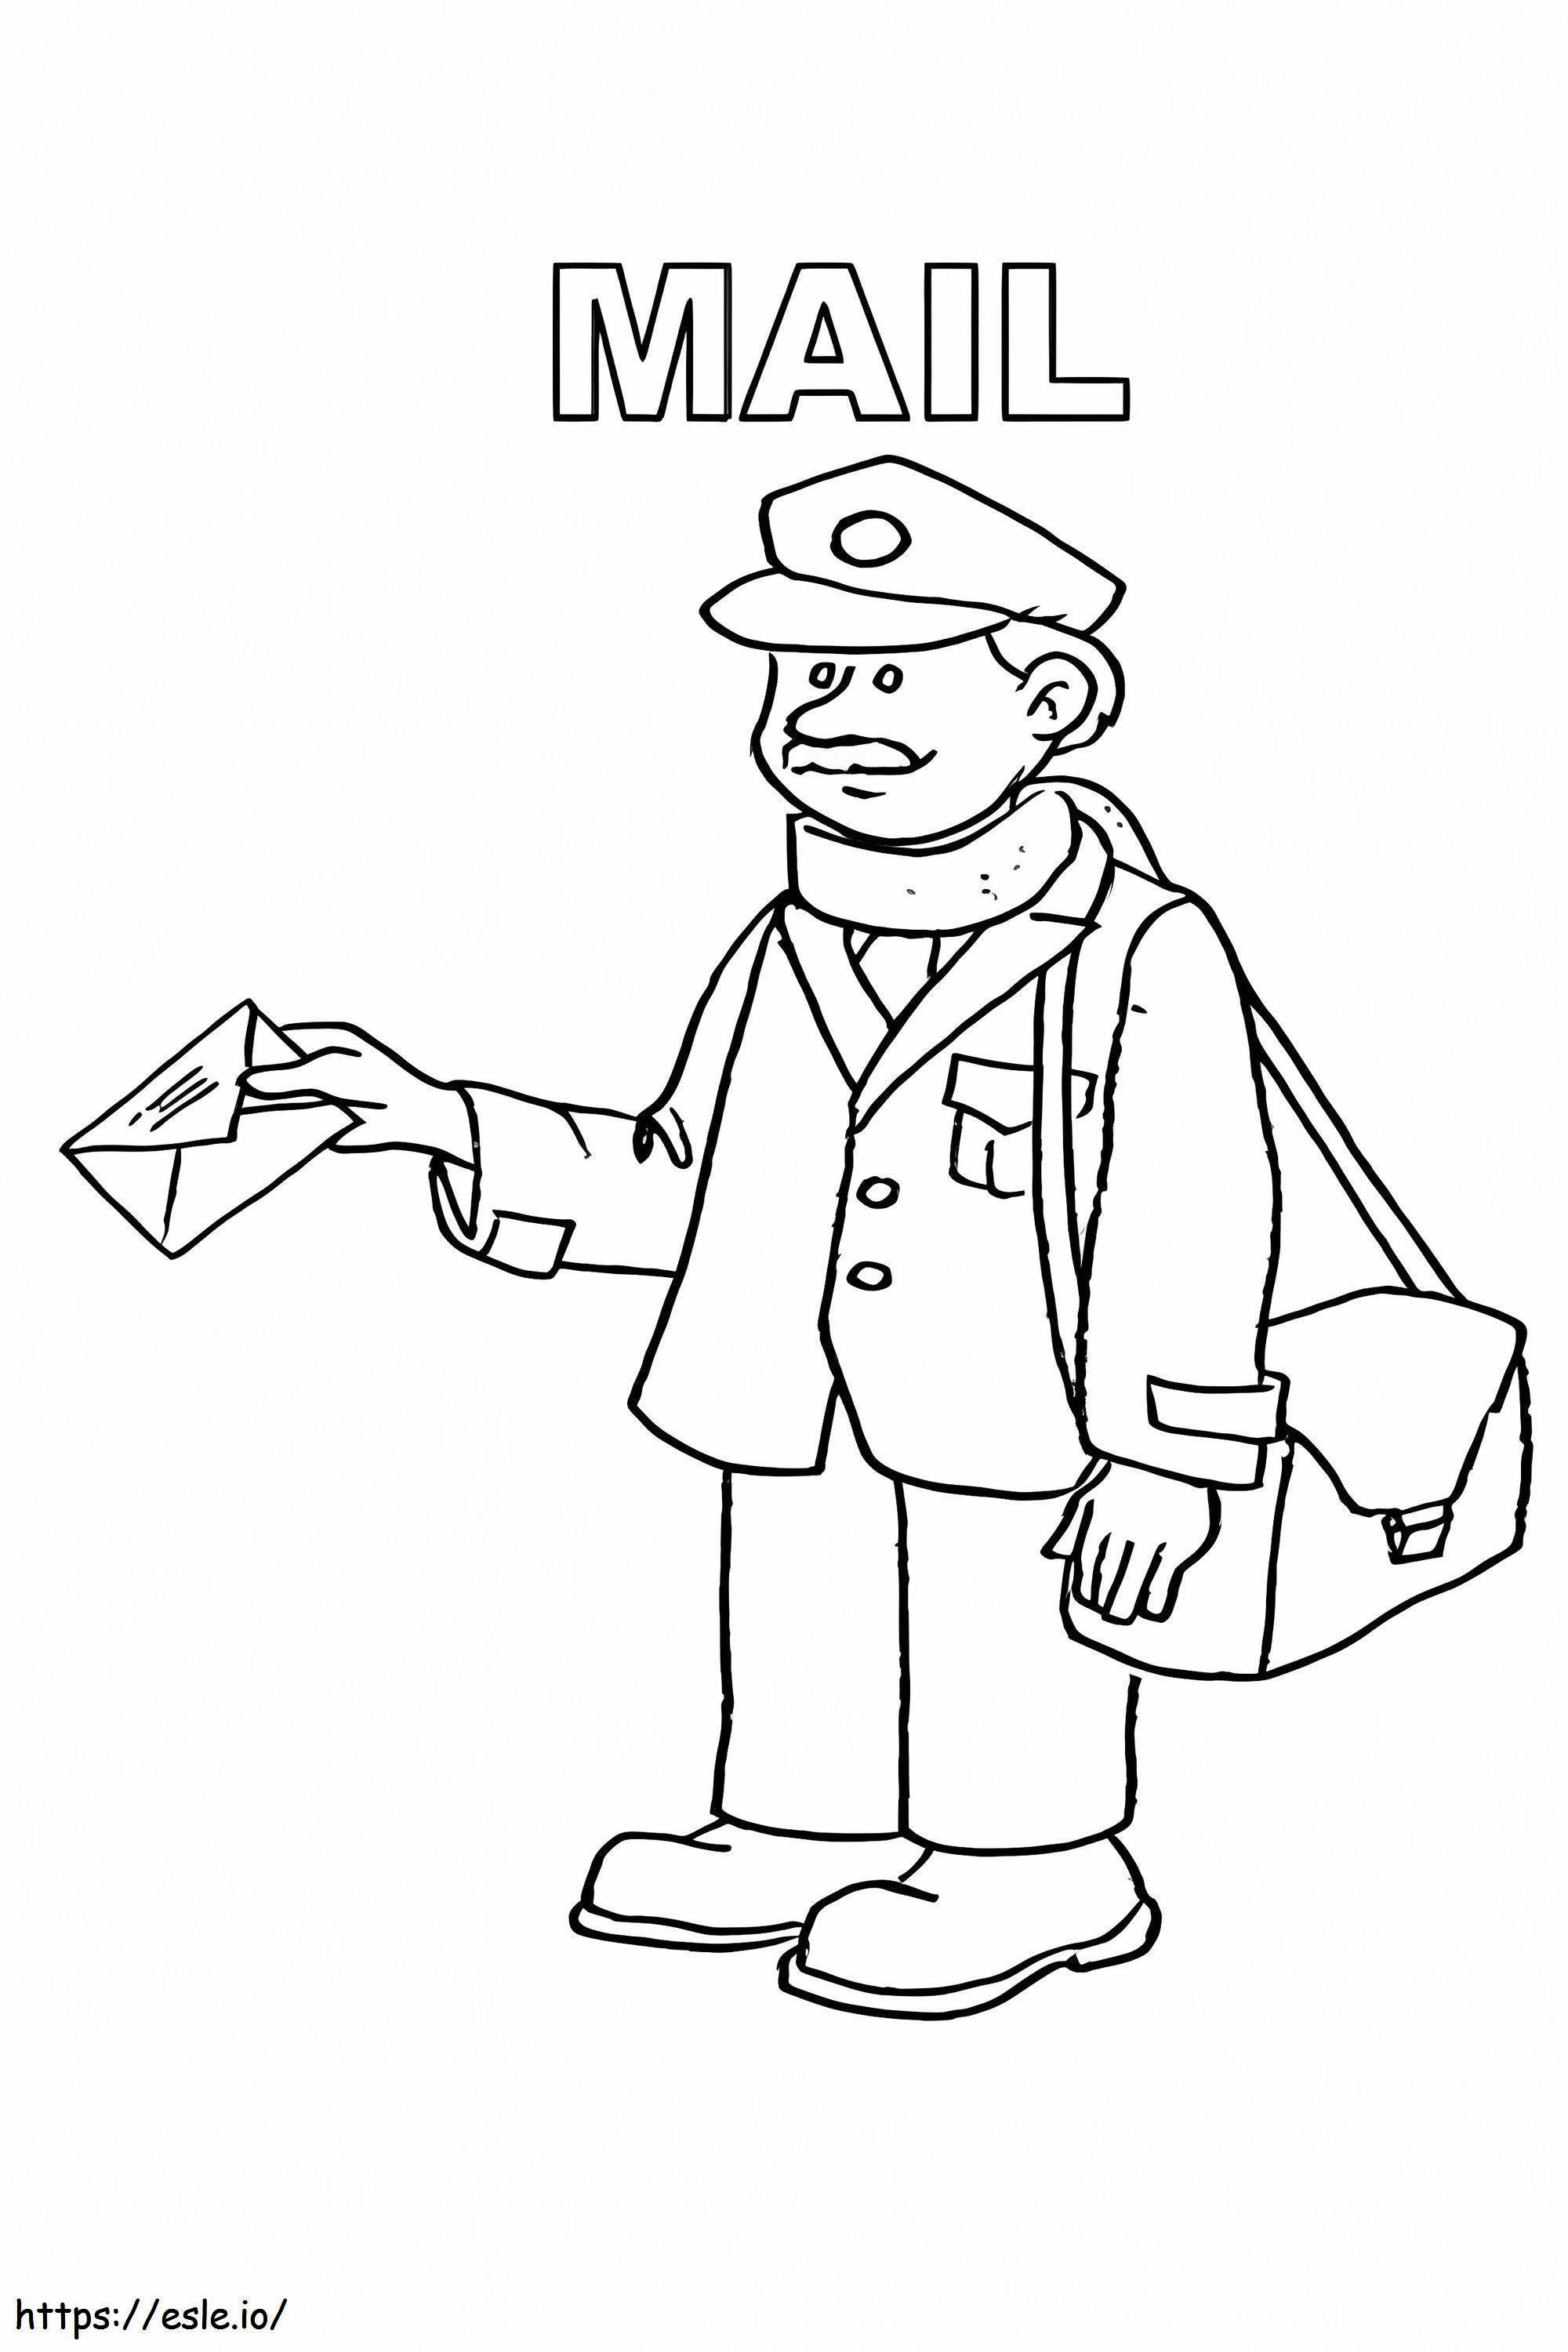 Old Postman coloring page